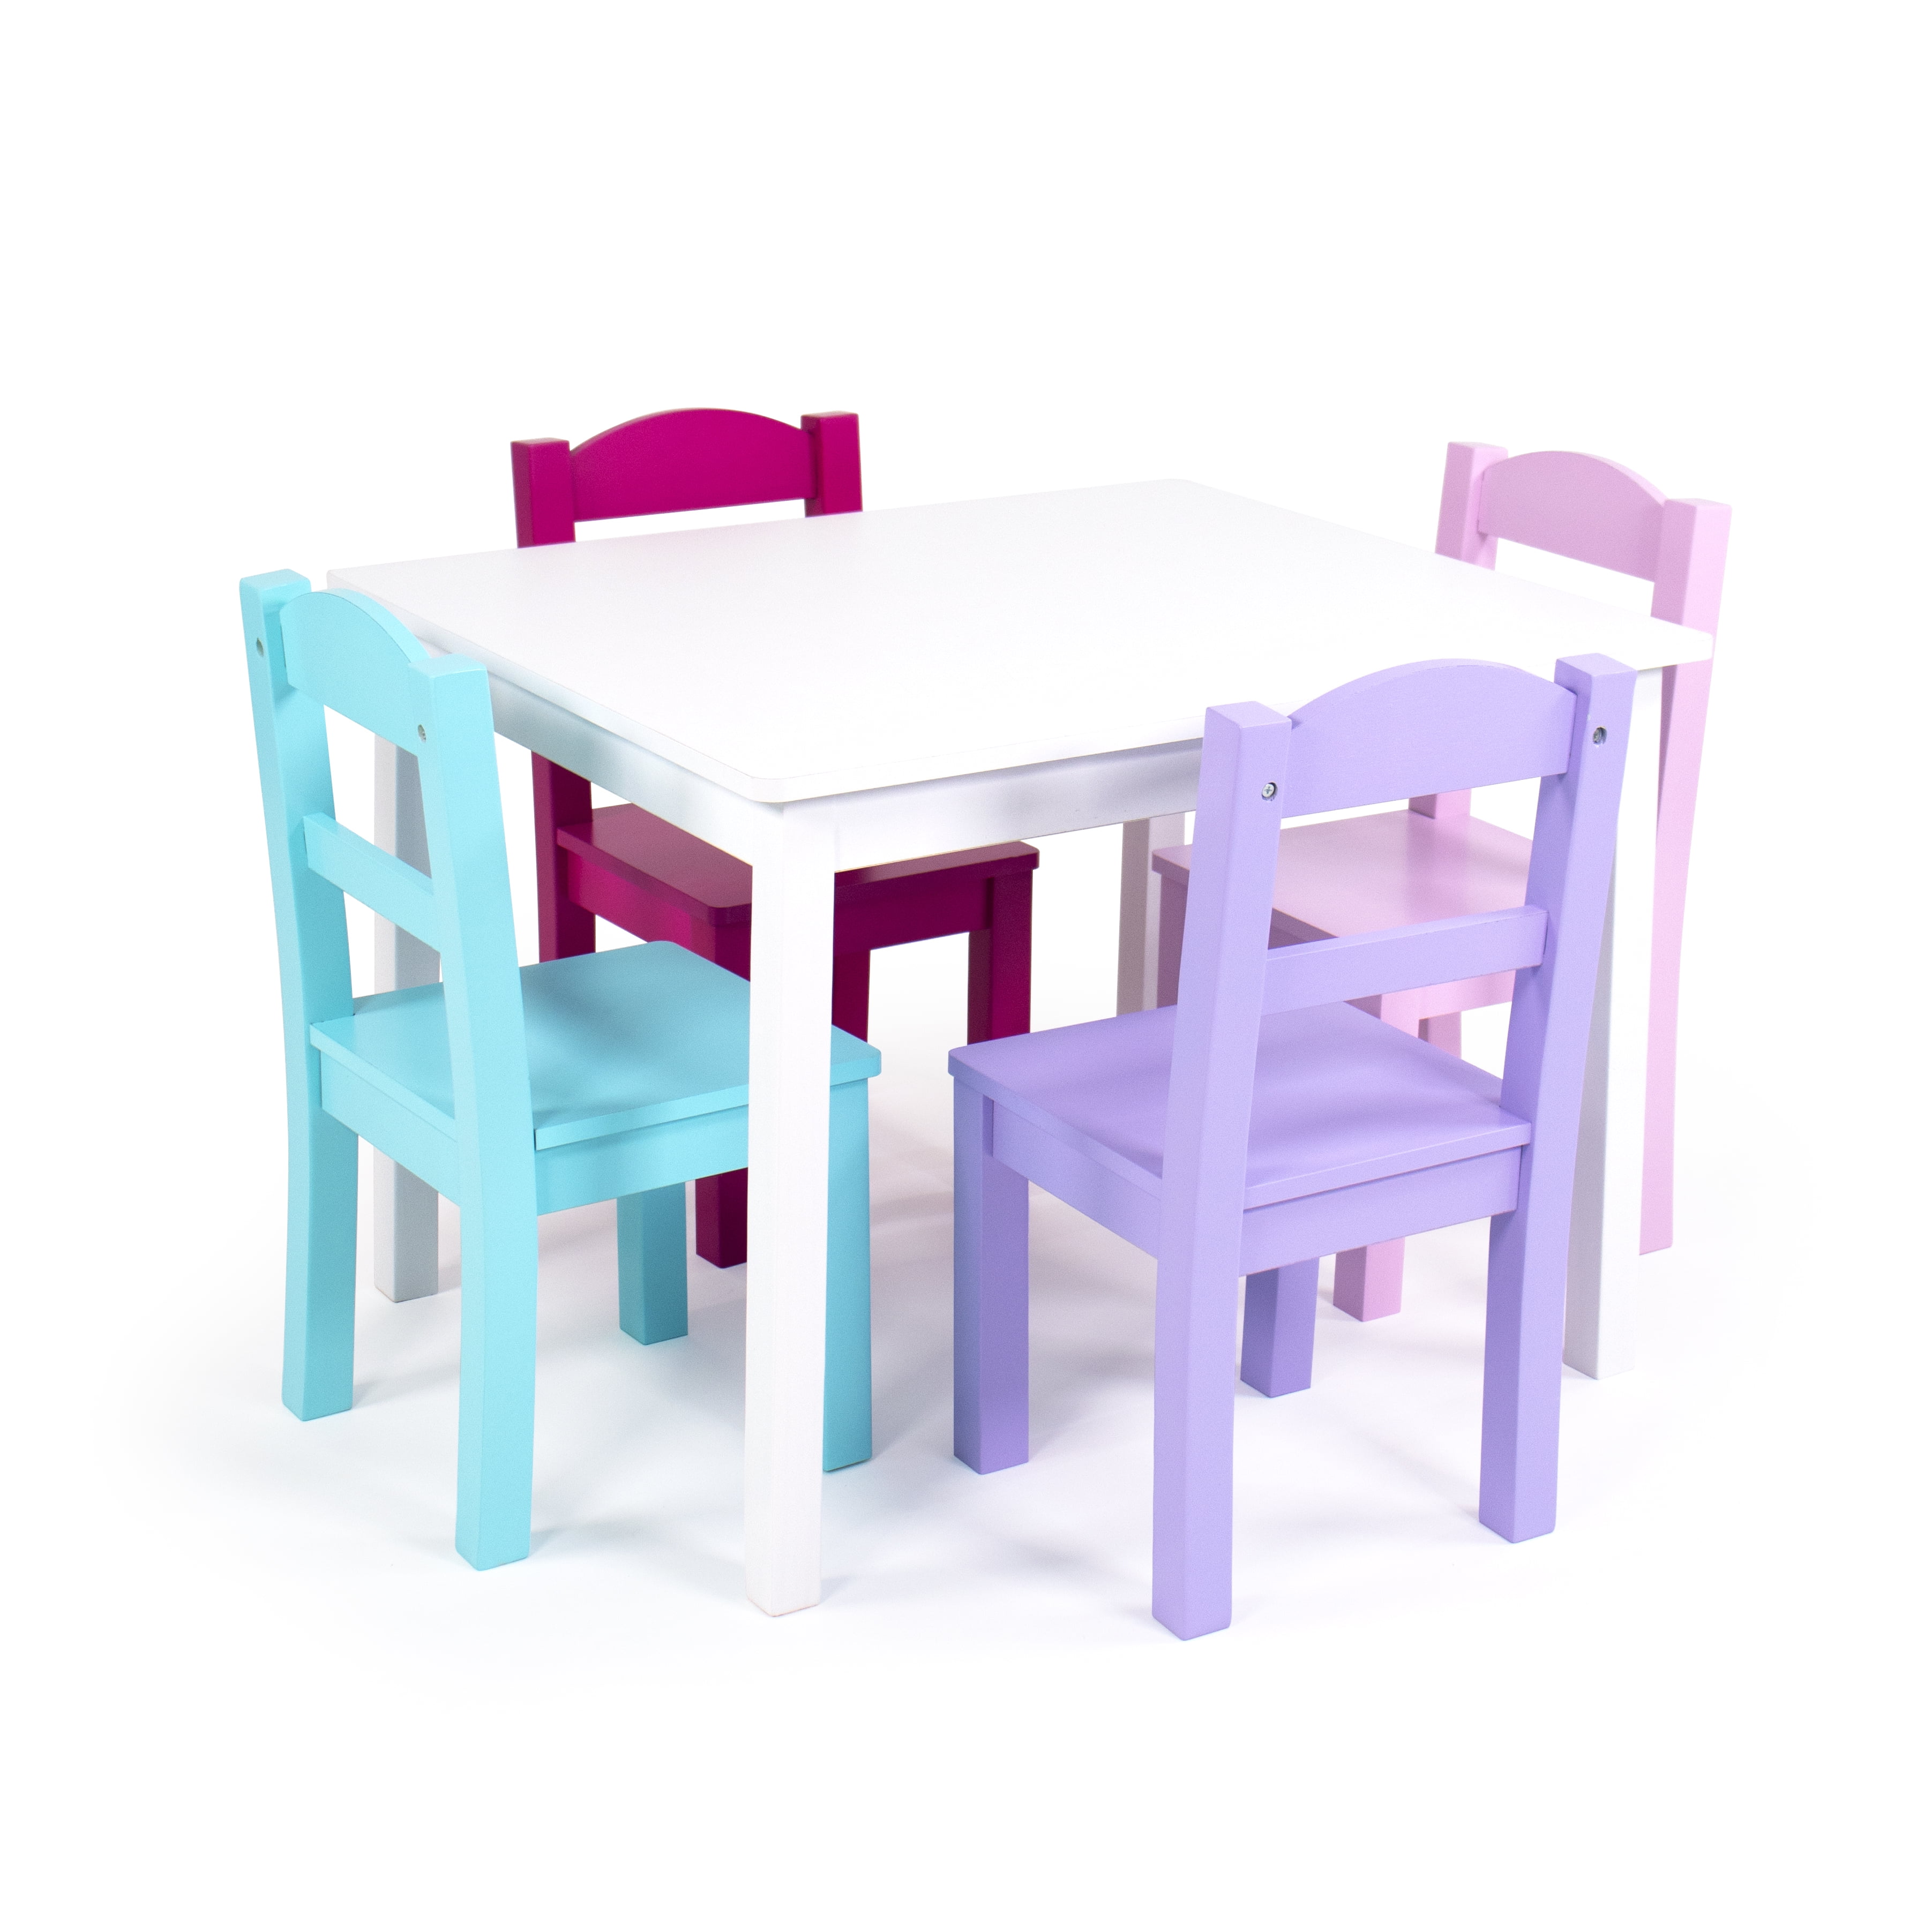 TMS Hayden Kids 3 Piece Square Table & Chair Set 